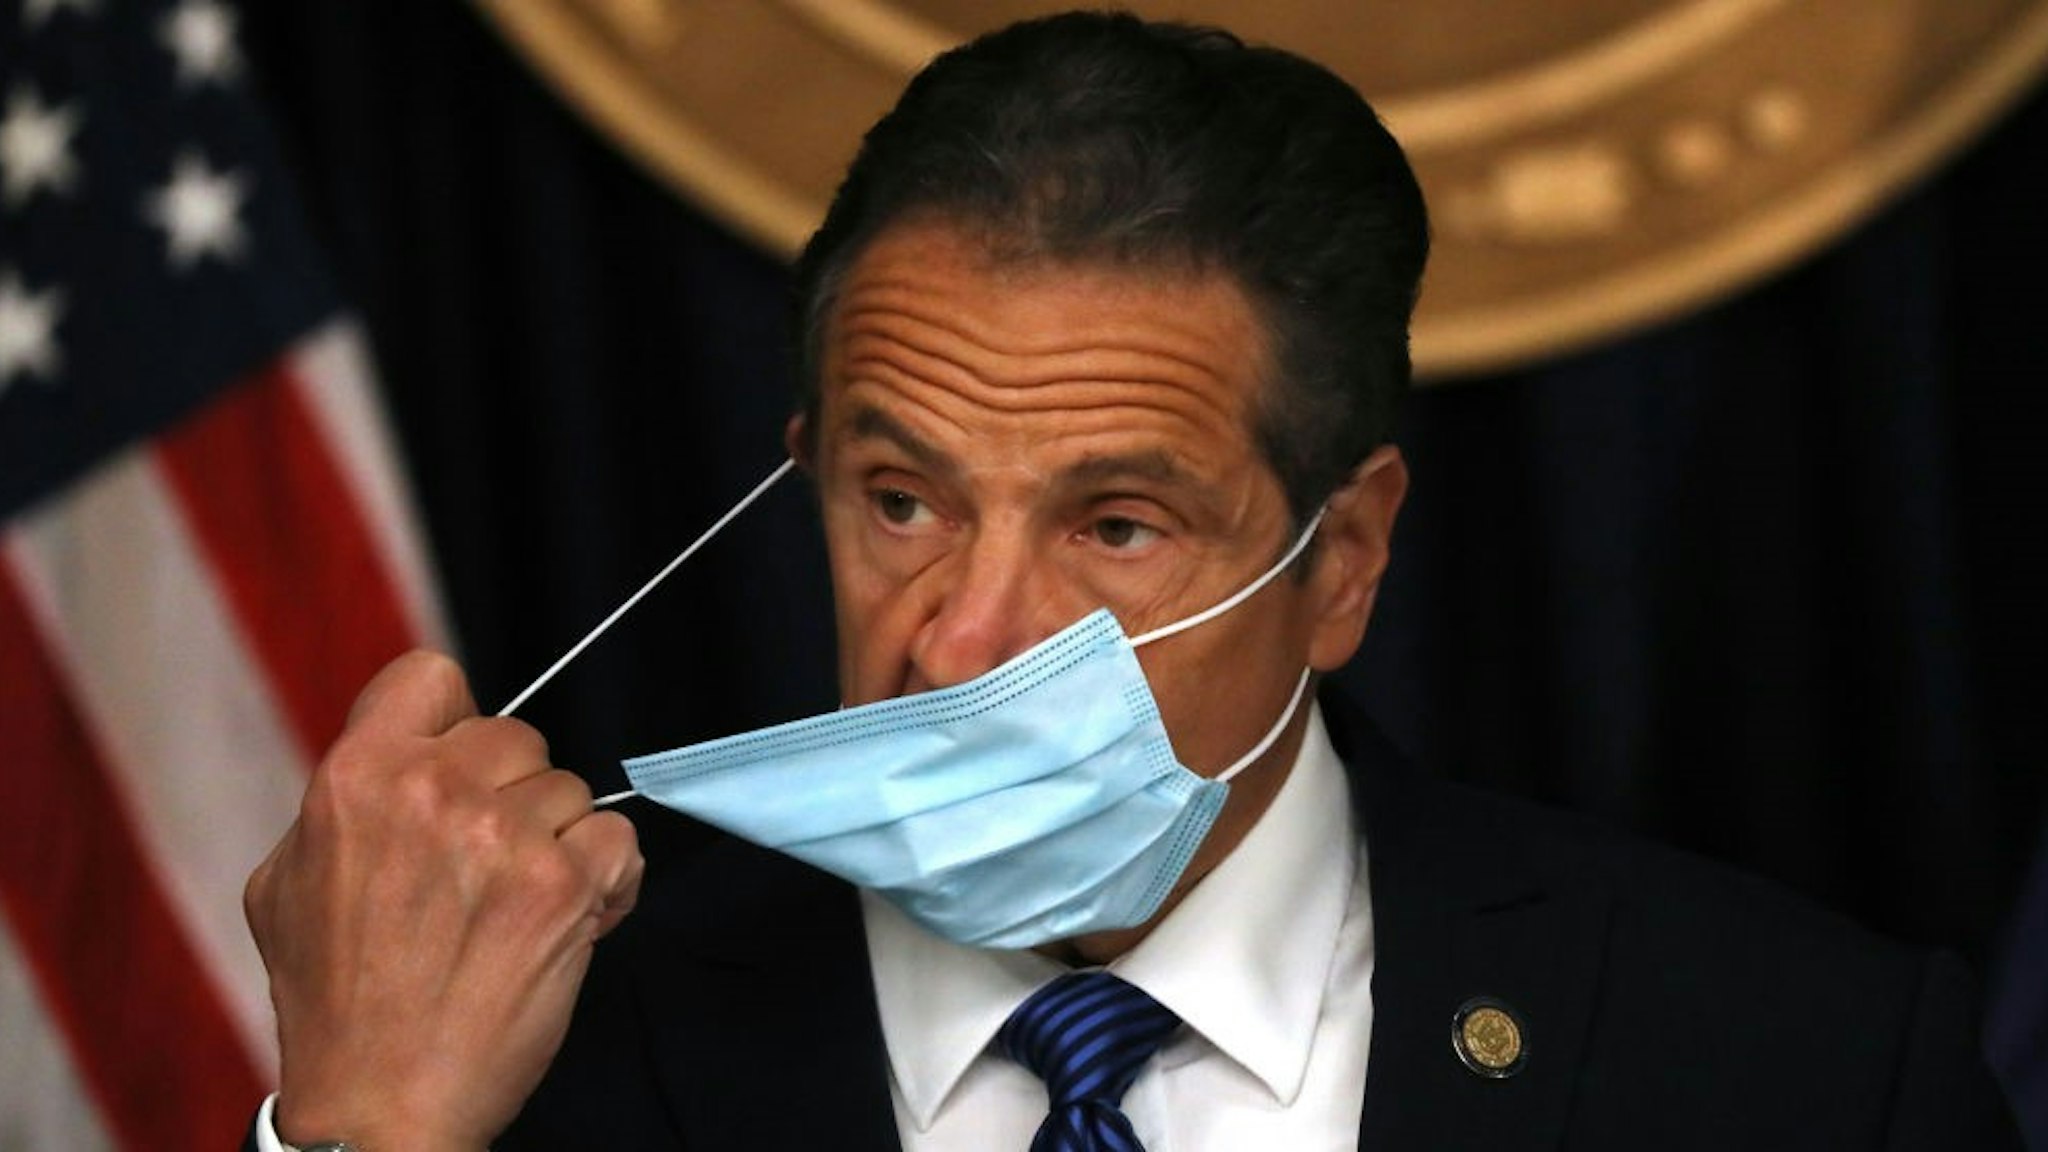 NEW YORK, NEW YORK - MAY 21: New York Governor Andrew Cuomo arrives with a face mask at a news conference on May 21, 2020 in New York City. While the governor continued to say that New York City is seeing a steady decline in coronavirus cases, he also mentioned that the number of countries reporting a mysterious illness in children believed to be connected to COVID-19 has nearly doubled in just one week. (Photo by